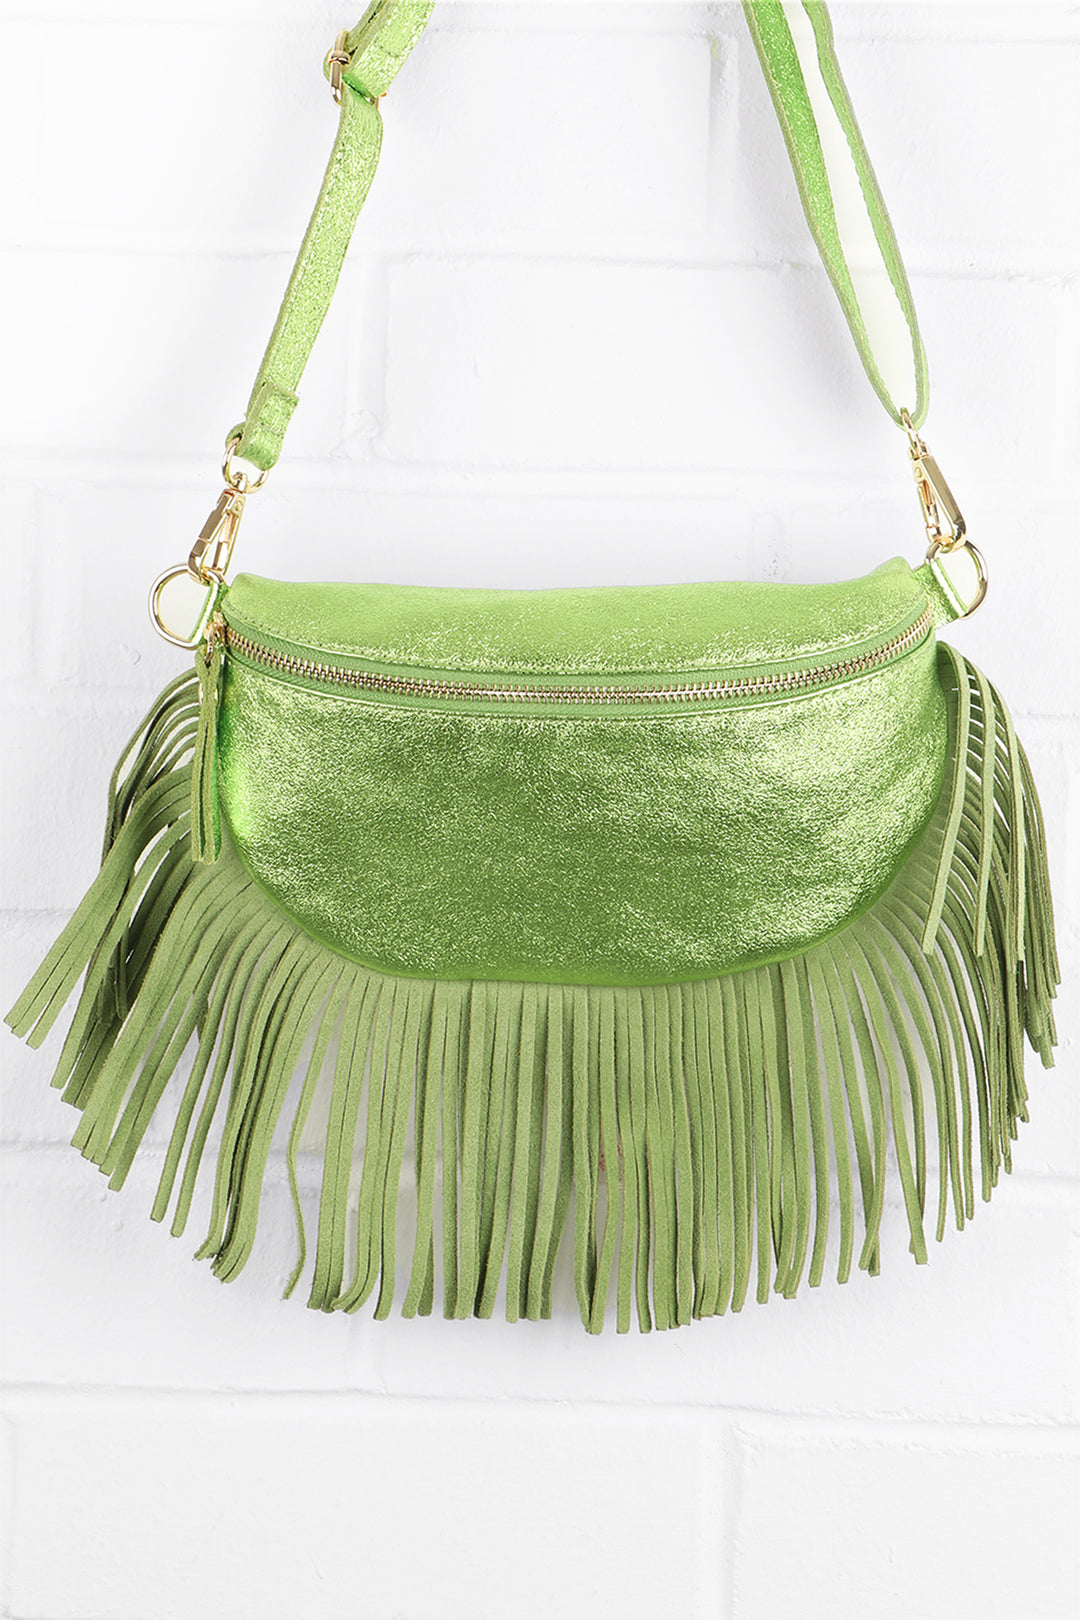 metallic lime green leather halfmoon bag with fringed trim and zip closure